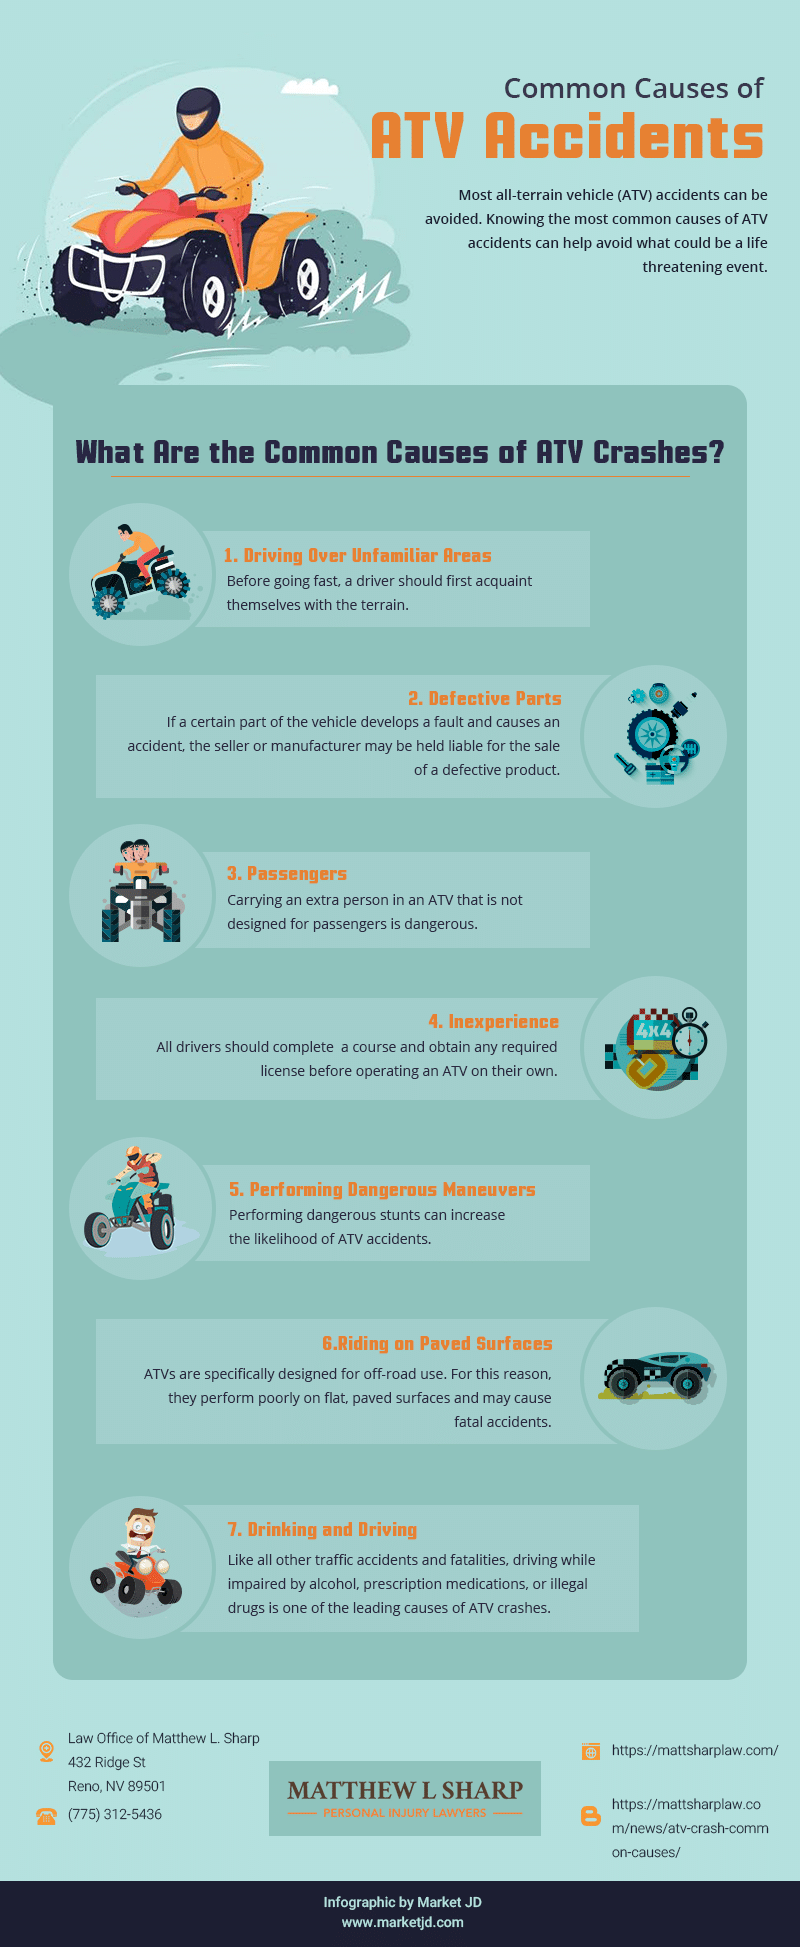 Common Causes of ATV Accidents infographic